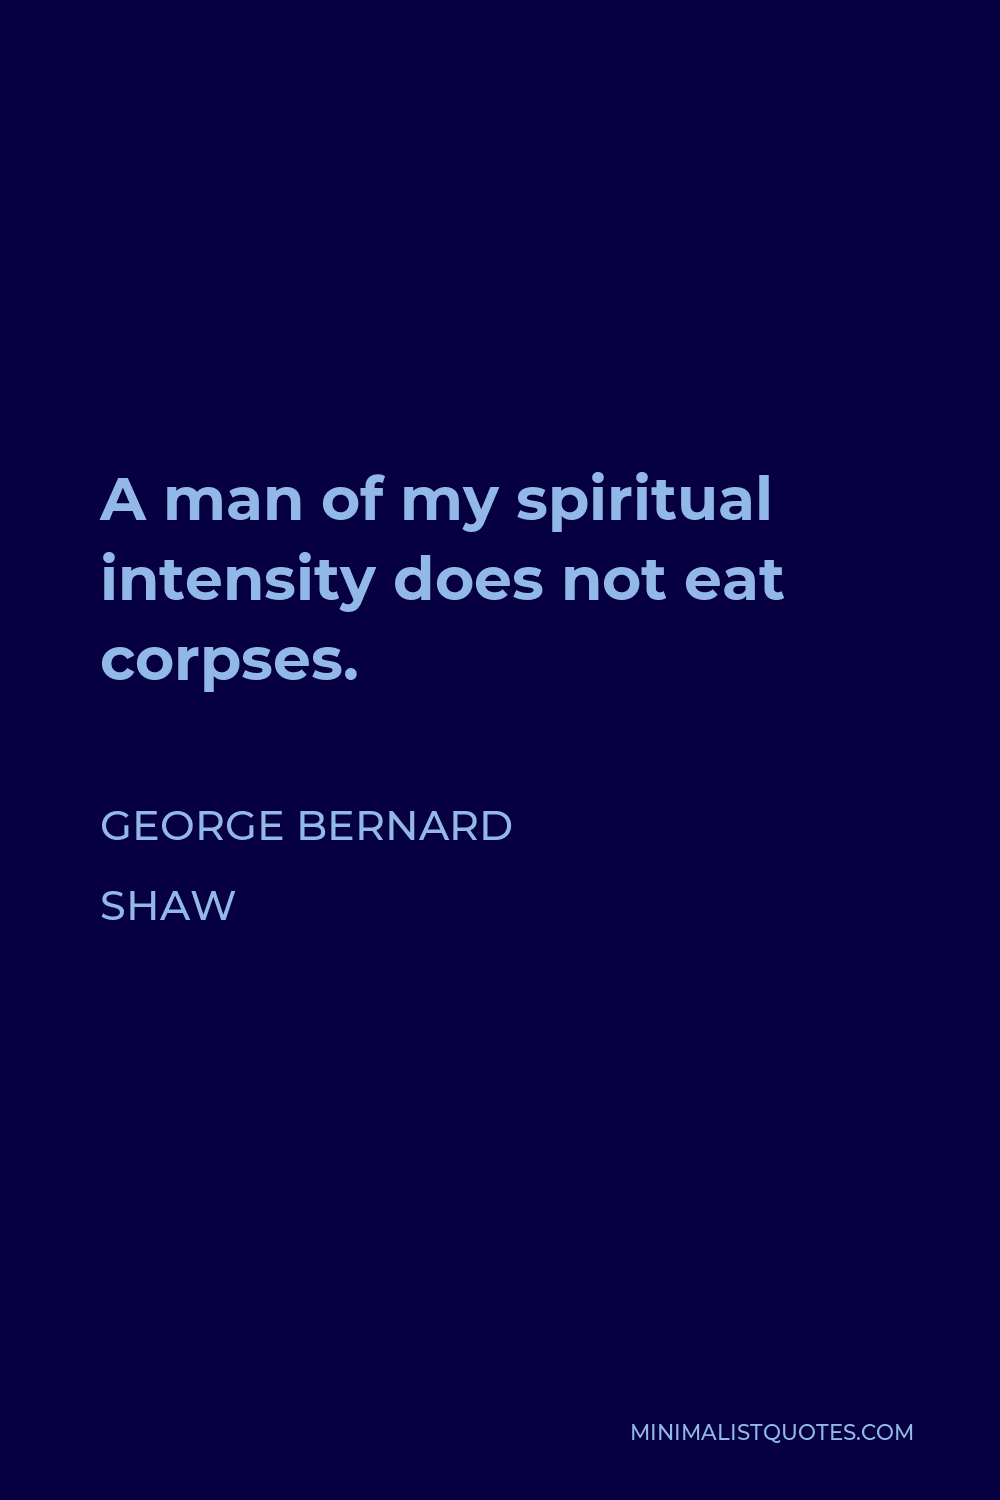 George Bernard Shaw Quote - A man of my spiritual intensity does not eat corpses.